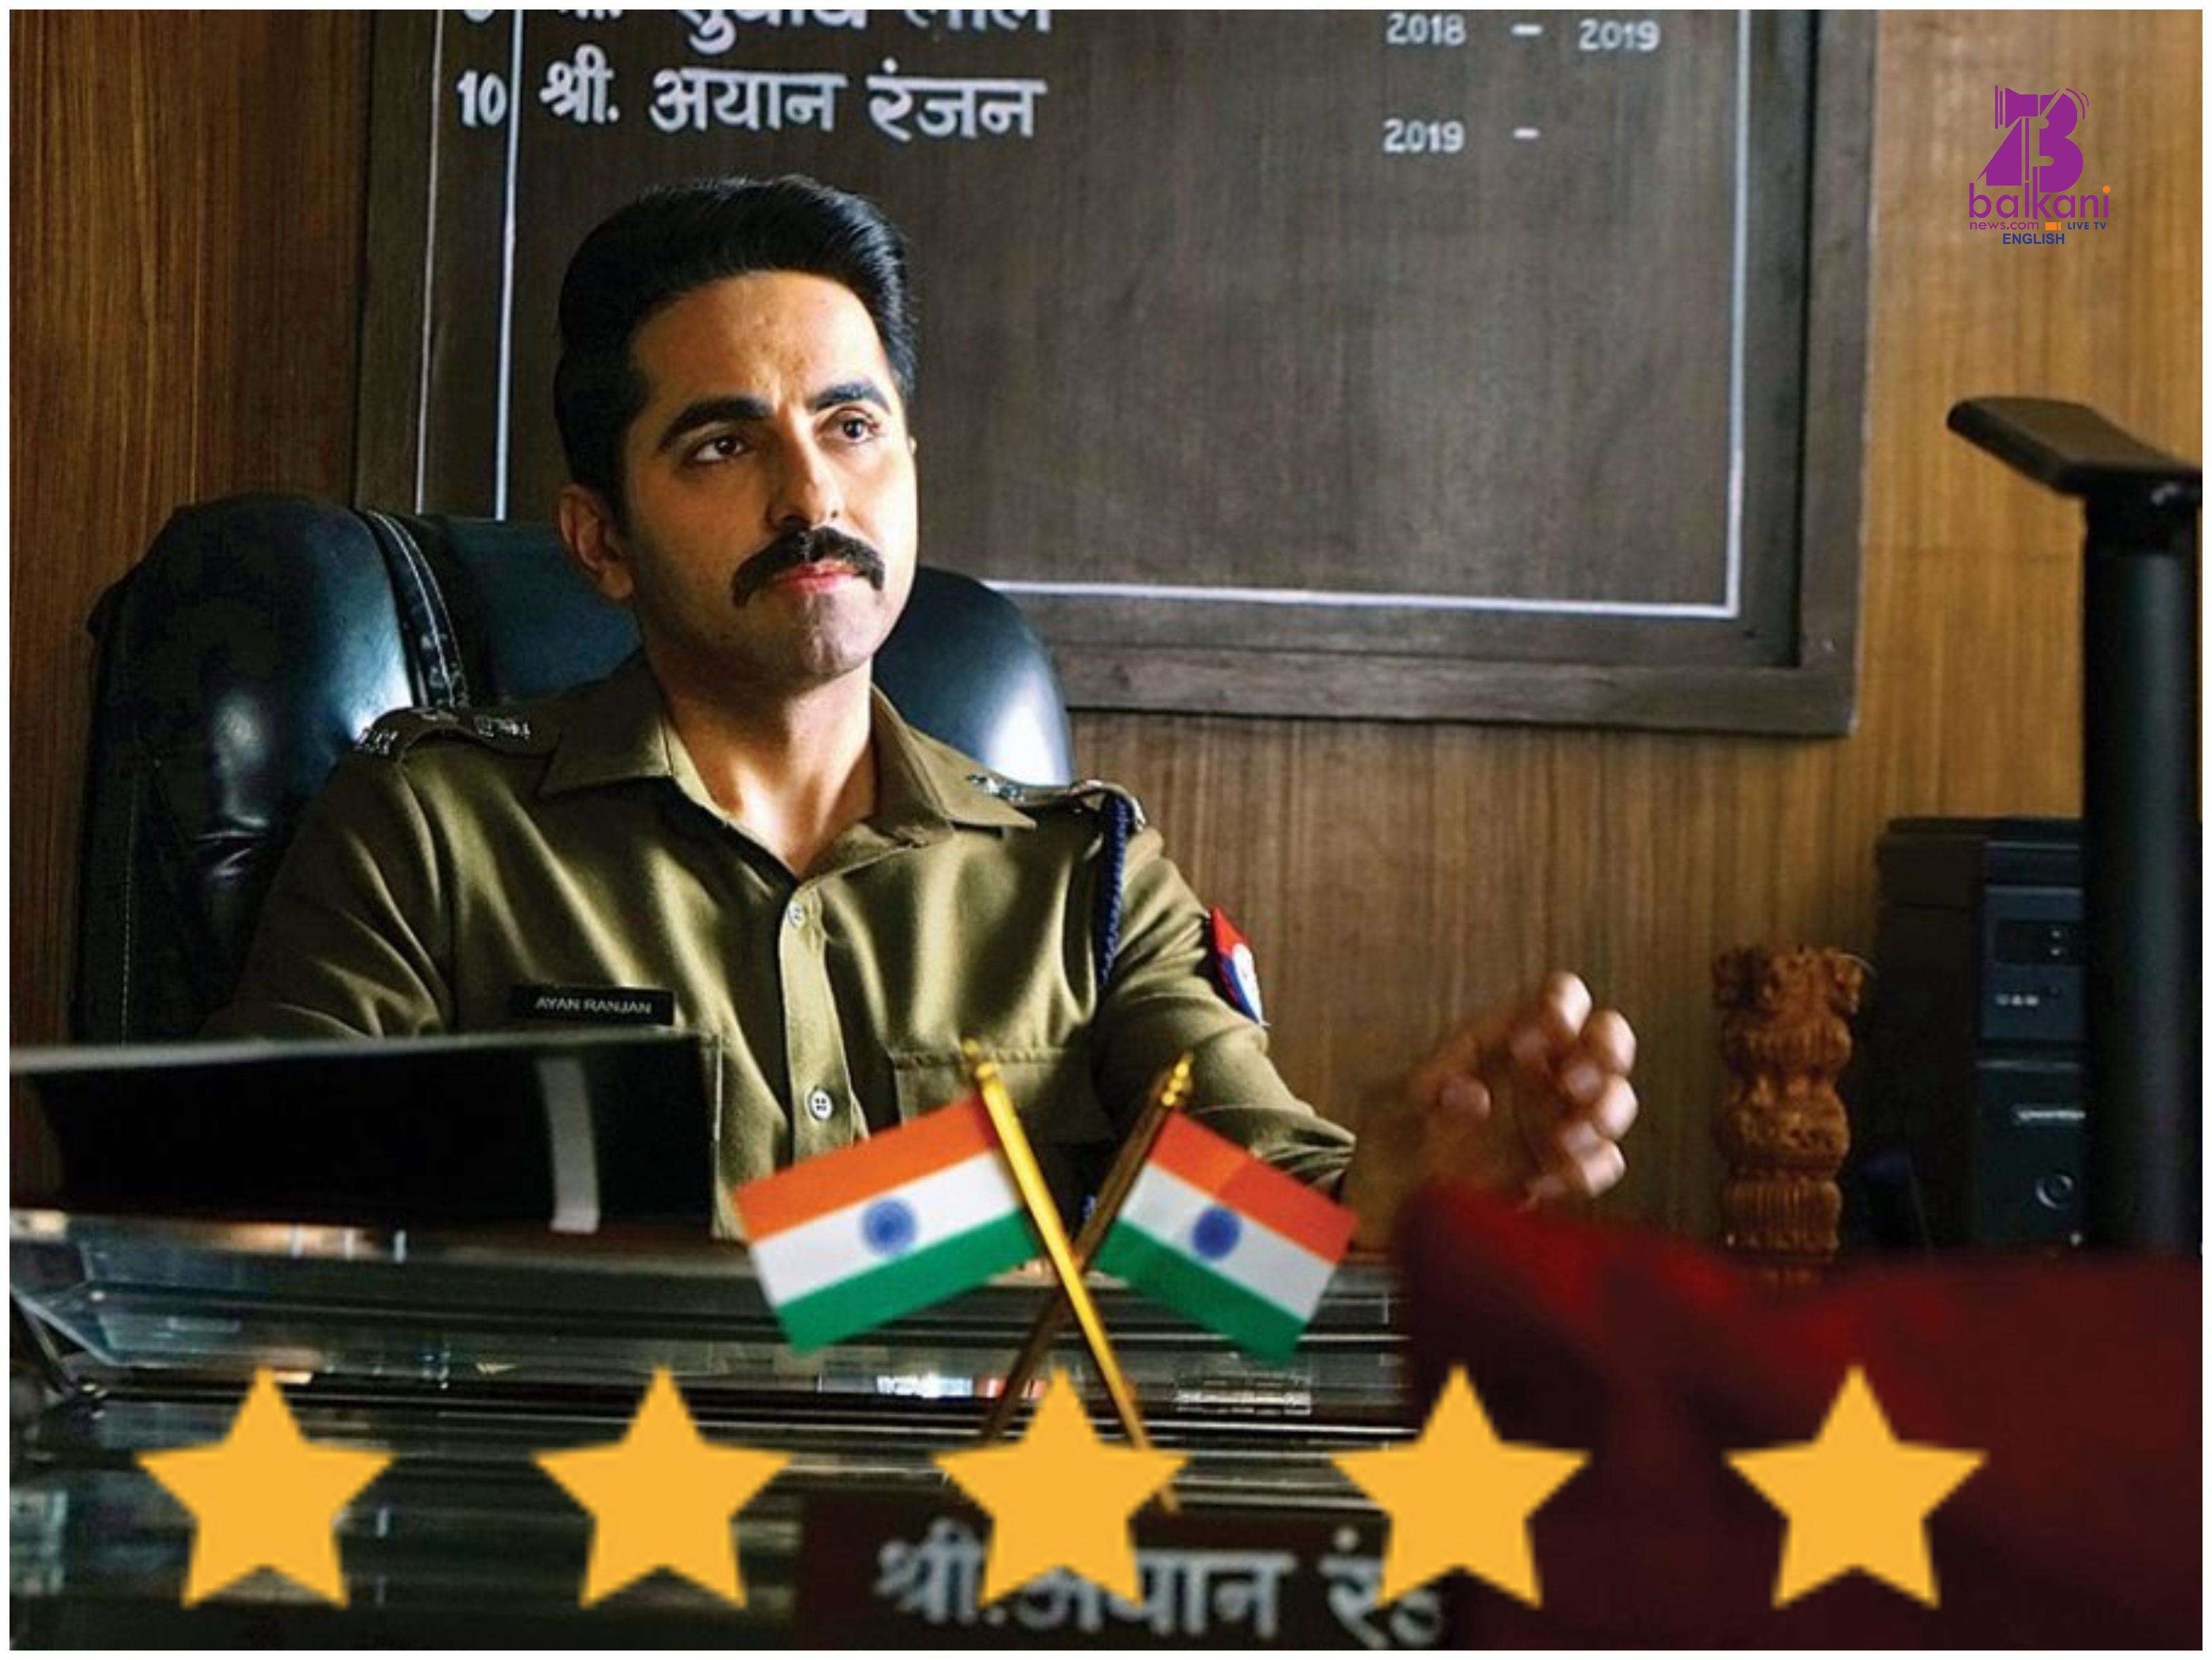 Article 15 Movie Review: Ayushmann Khurrana and Anubhav Sinha have completely nailed it, relevant mirror of Modern India!